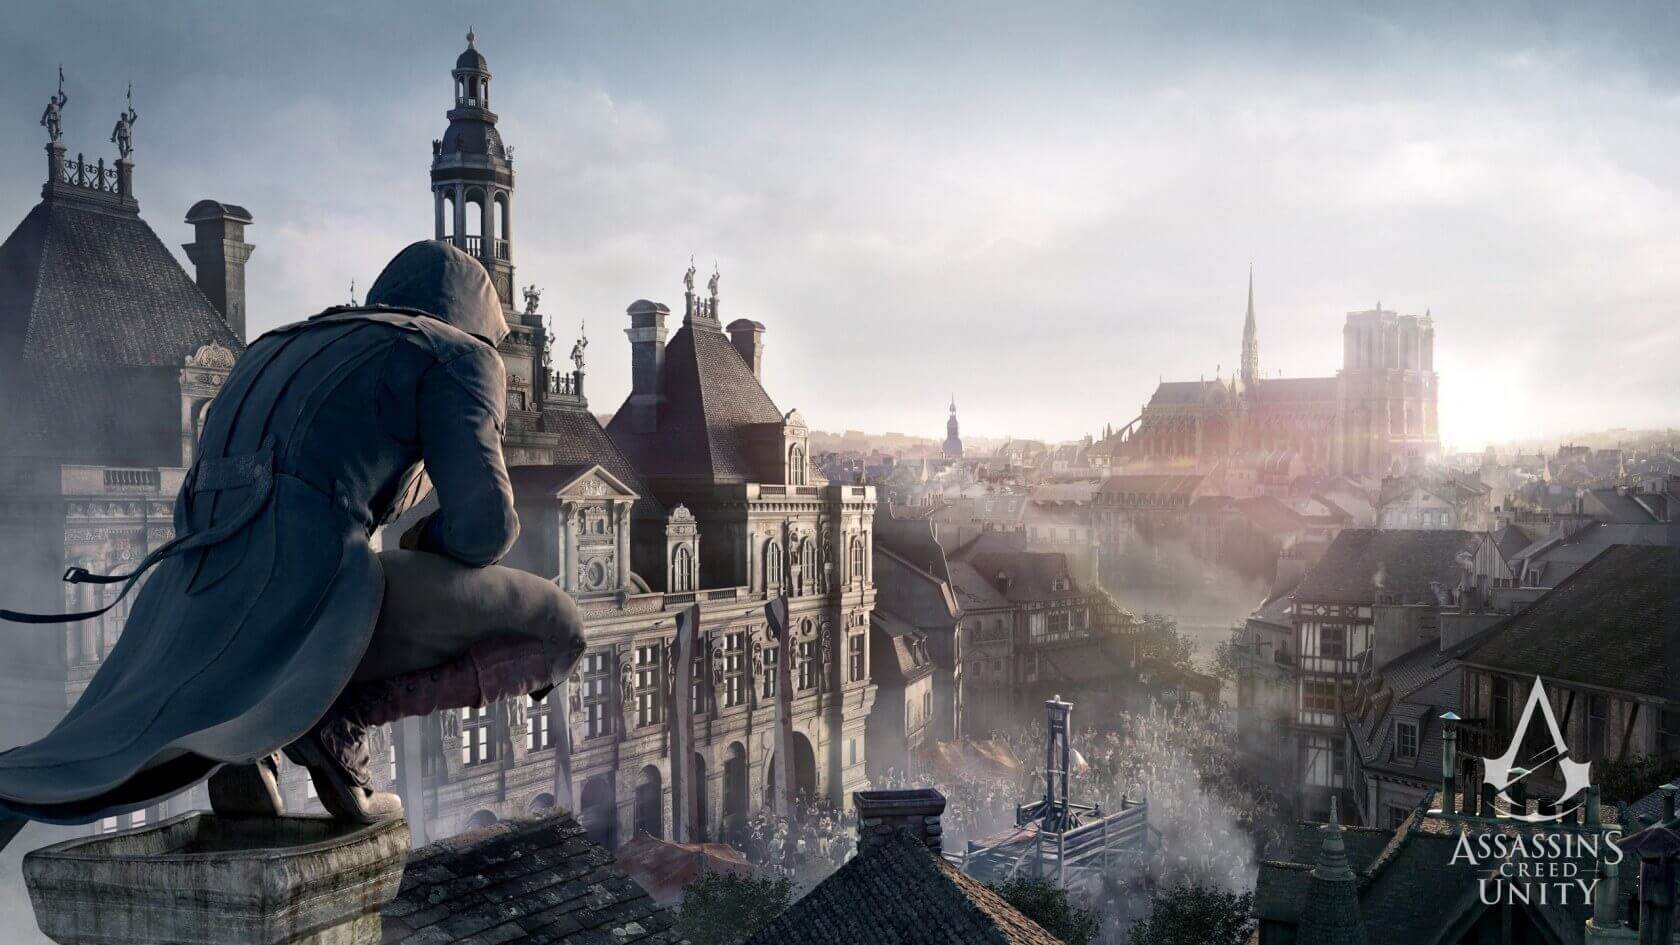 Assassin's Creed Unity gets review bombed – positively